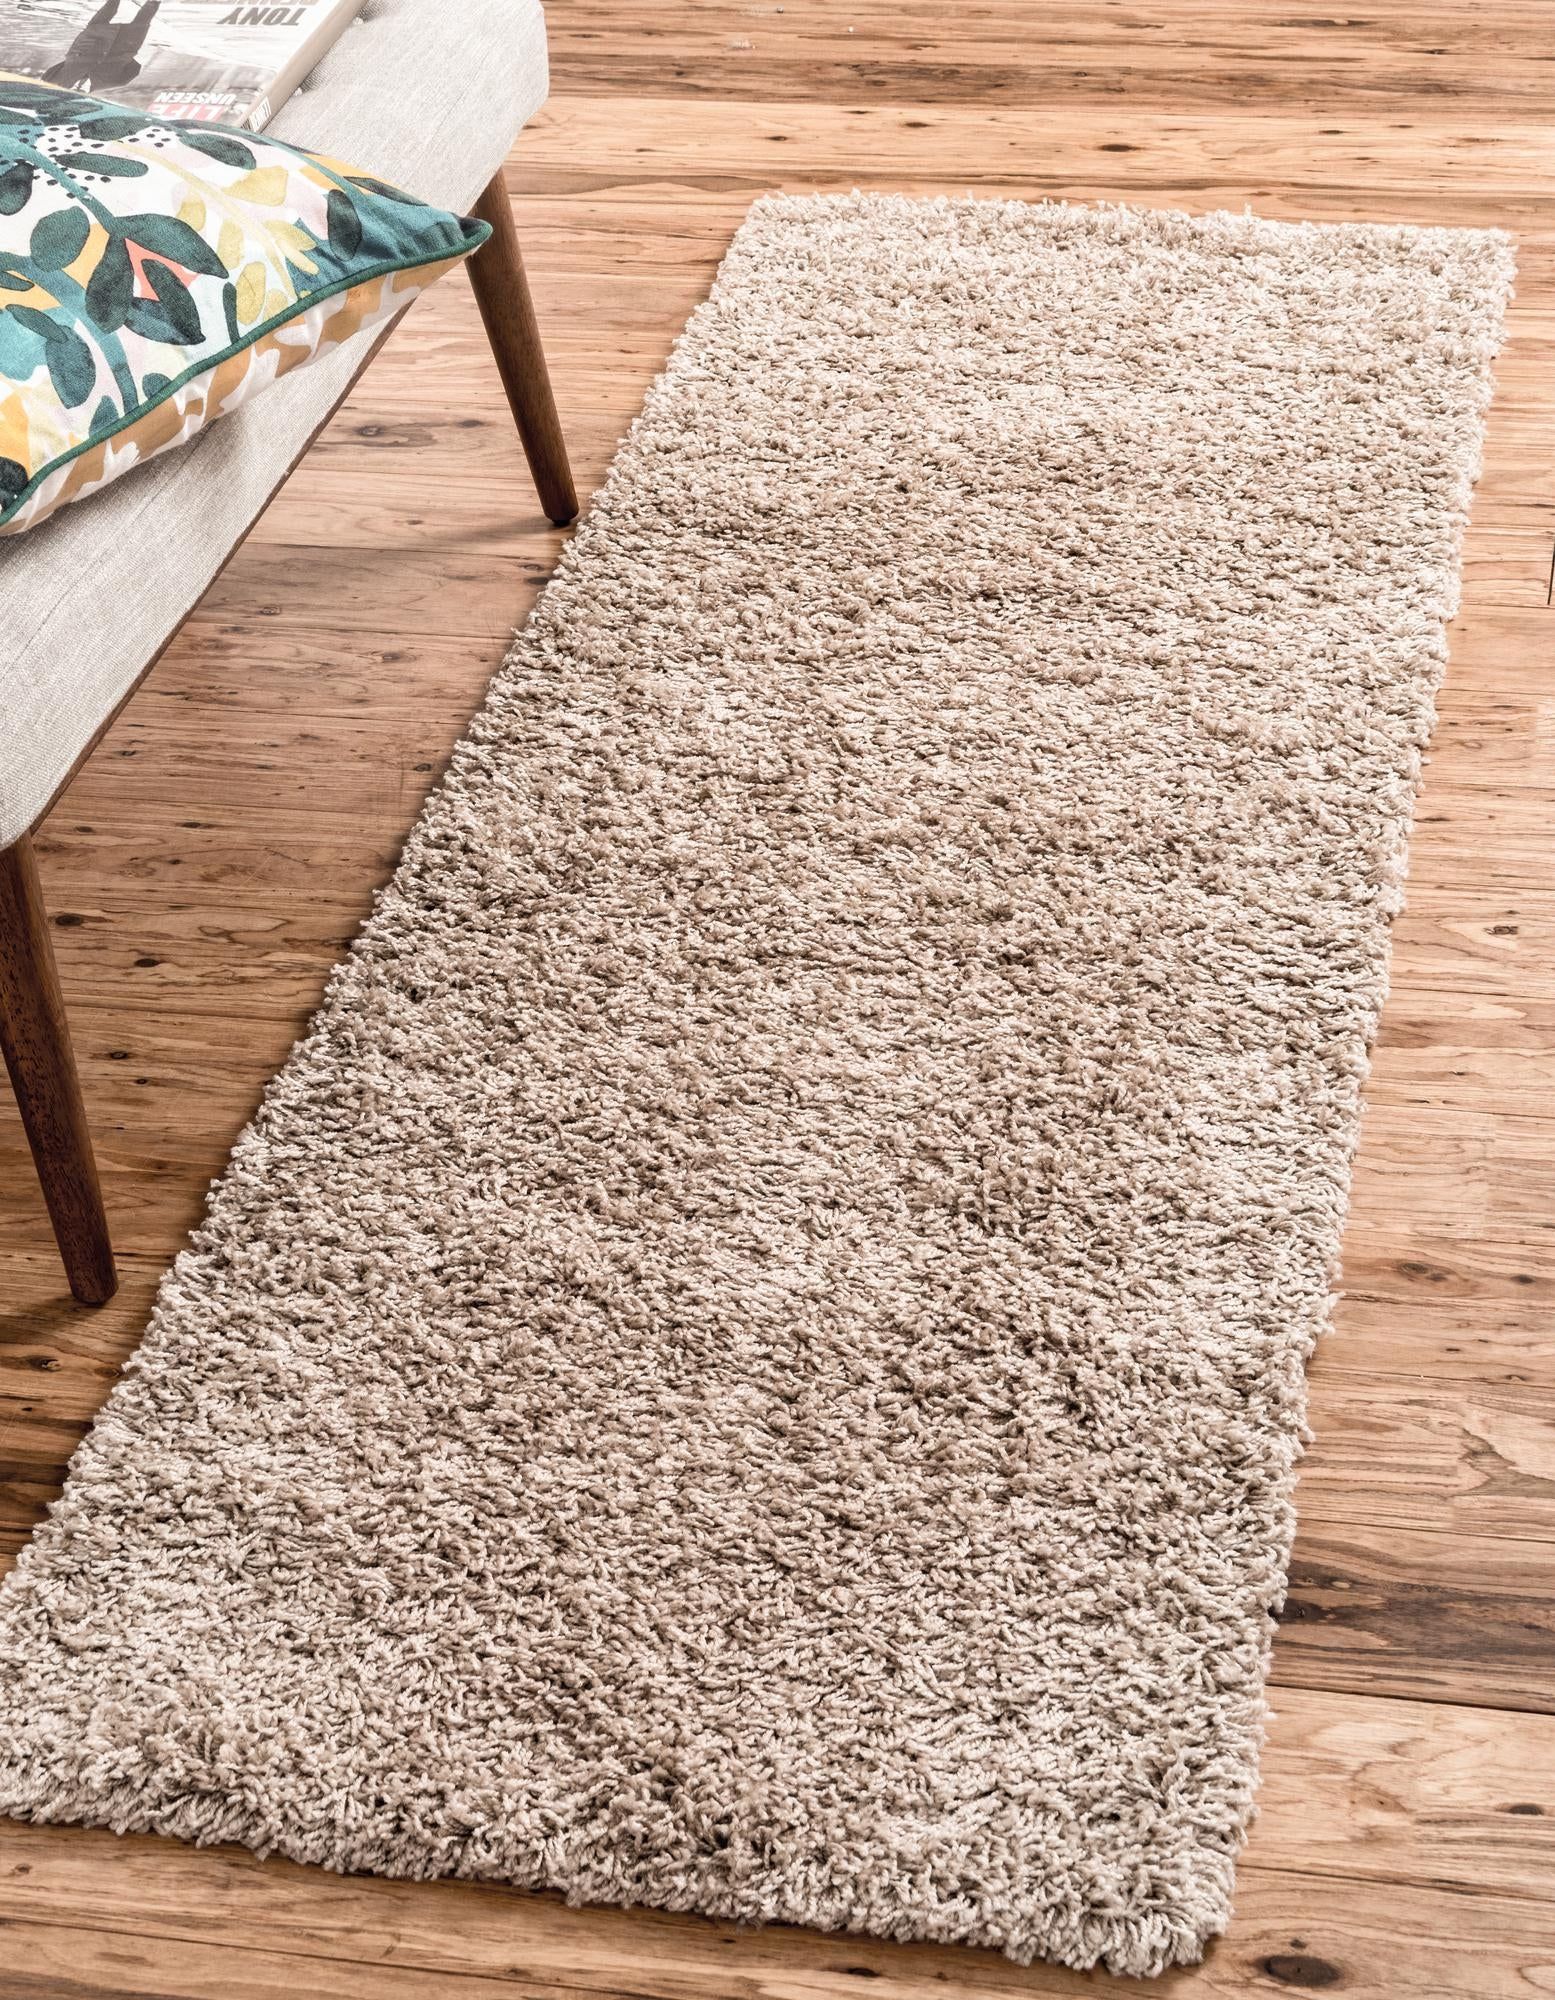 Rugs Solid Shag Collection Rug – 20 Ft Runner Taupe Shag Rug Perfect  For Hallways, Entryways – Walmart With Regard To Solid Shag Rugs (View 12 of 15)